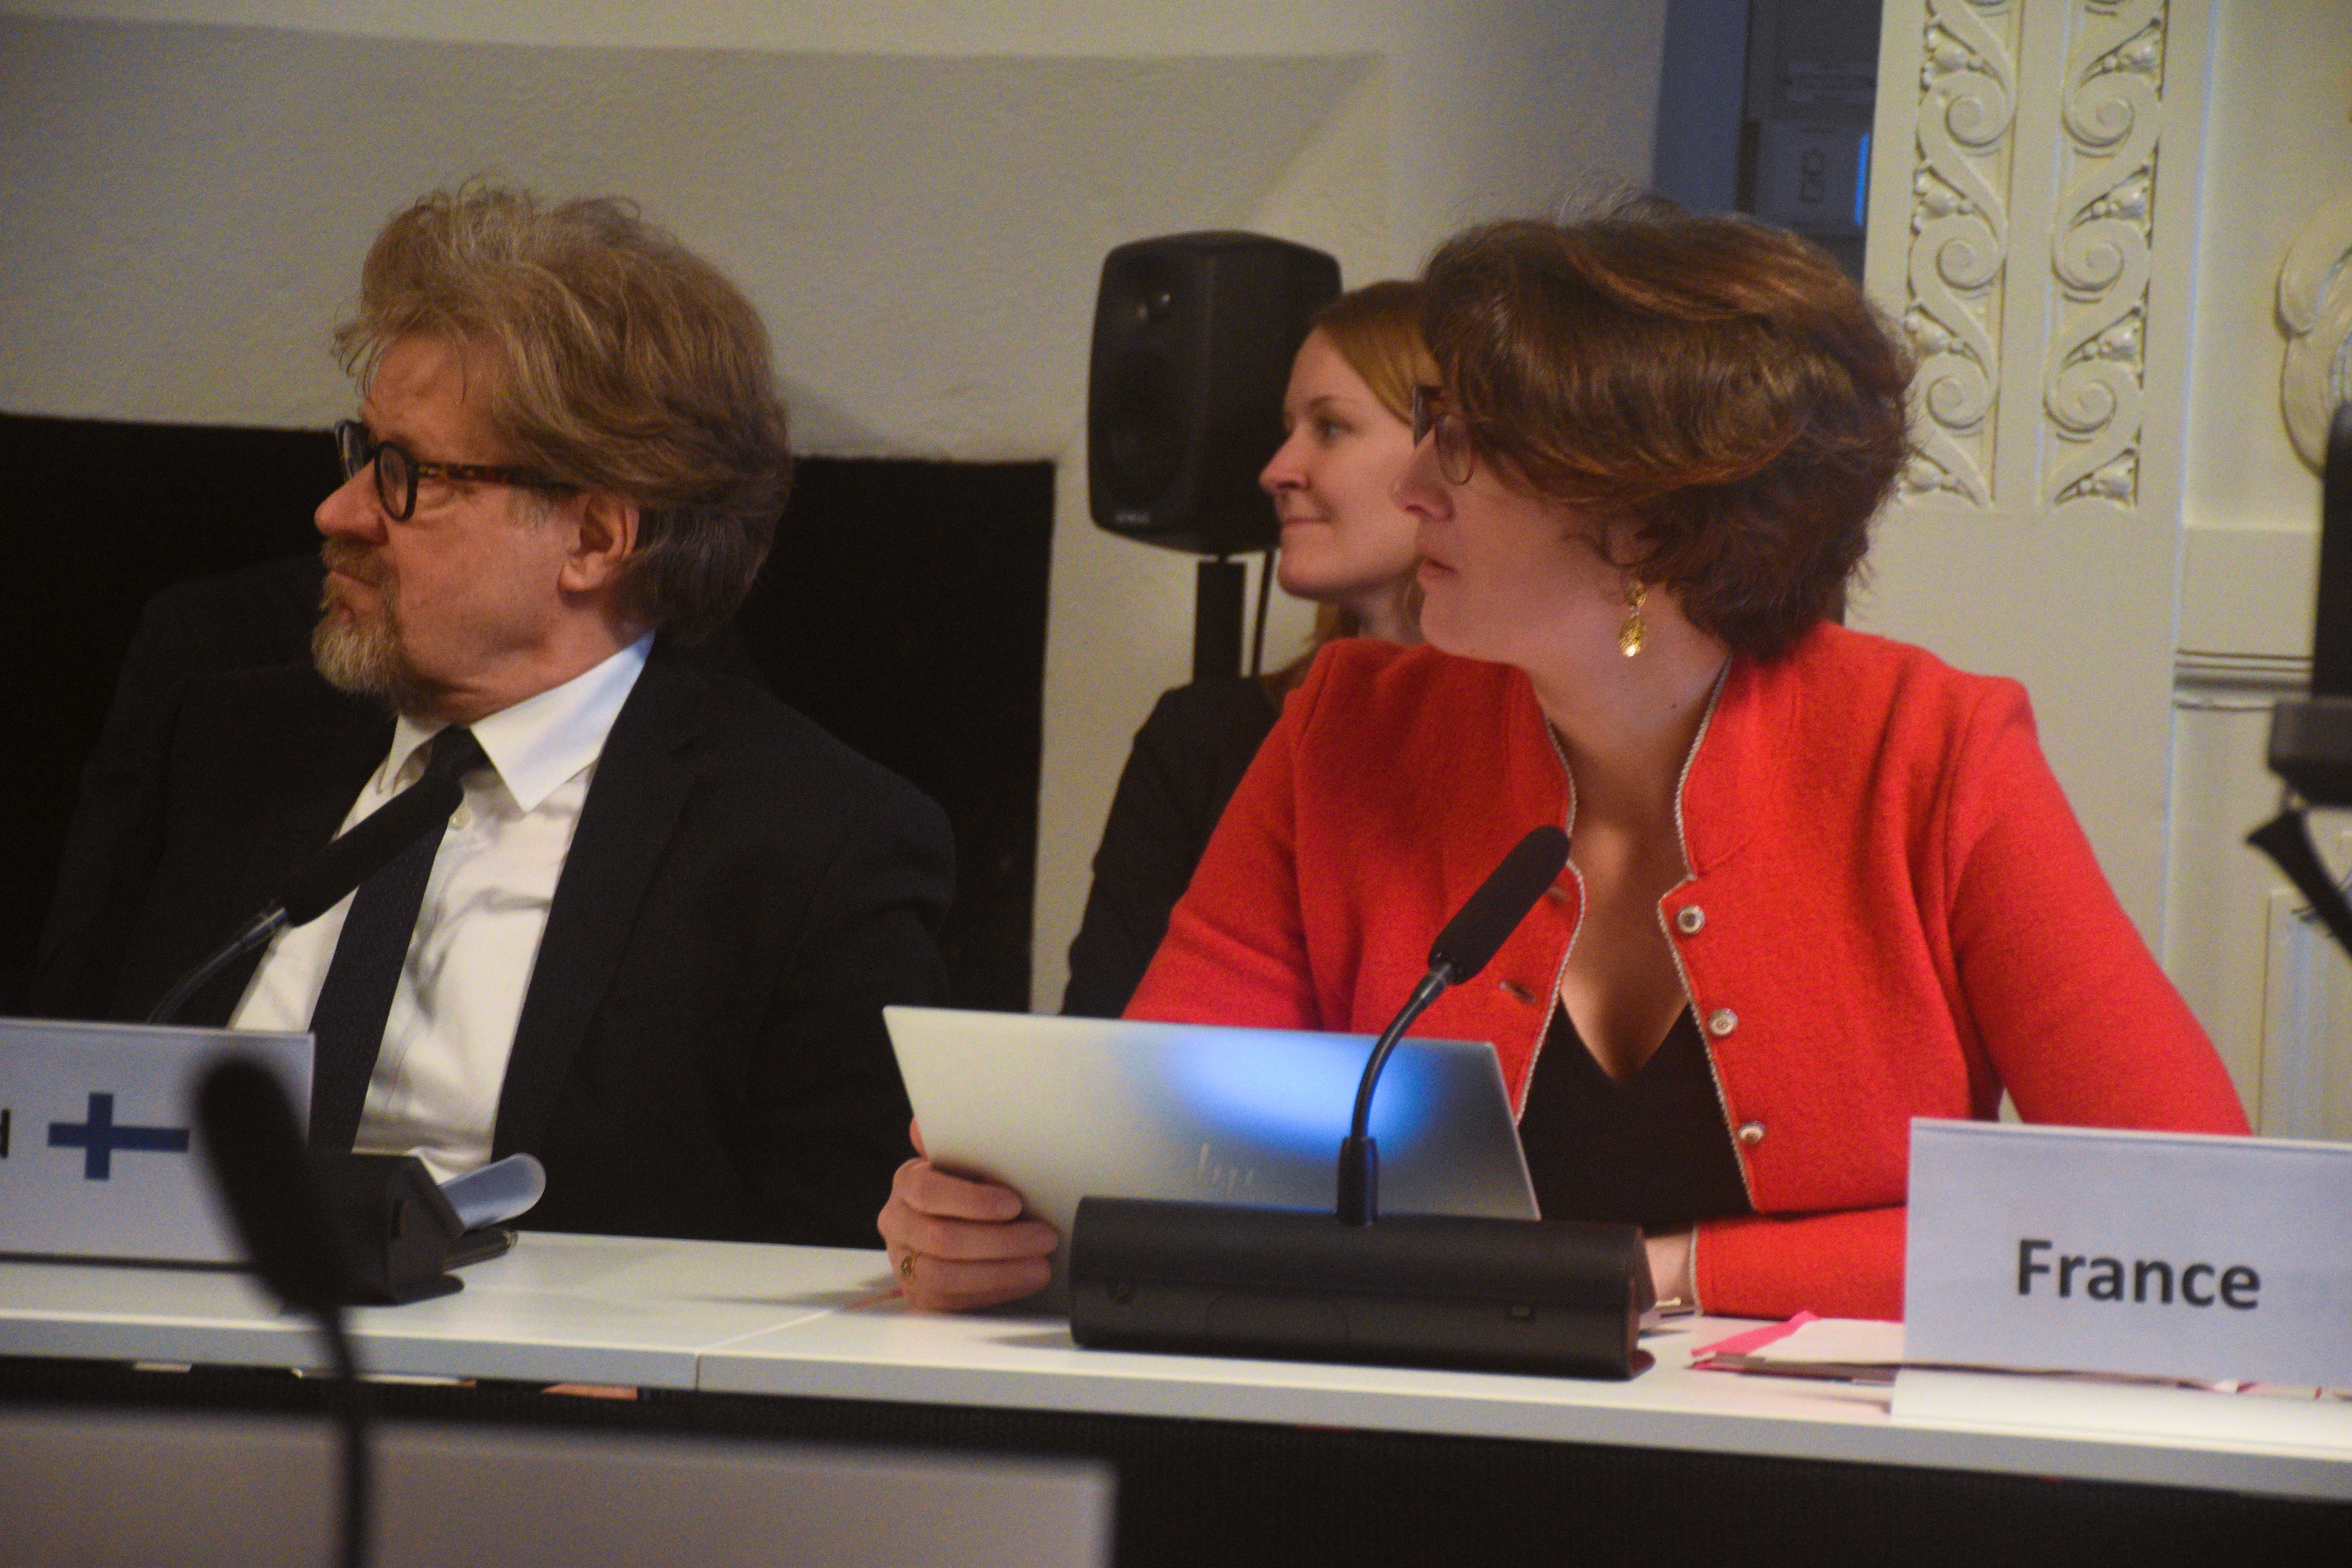 From left: Pekka Hukka, Ambassador of Rule of Law, Democracy and Good Governance at the Finnish Ministry for Foreign Affairs sitting next to Clémence Weulersse, Head of the Department for Democratic Governance, representing the French Ministry for Europe and Foreign Affairs at the Council of Member States meeting on 1 December 2023.